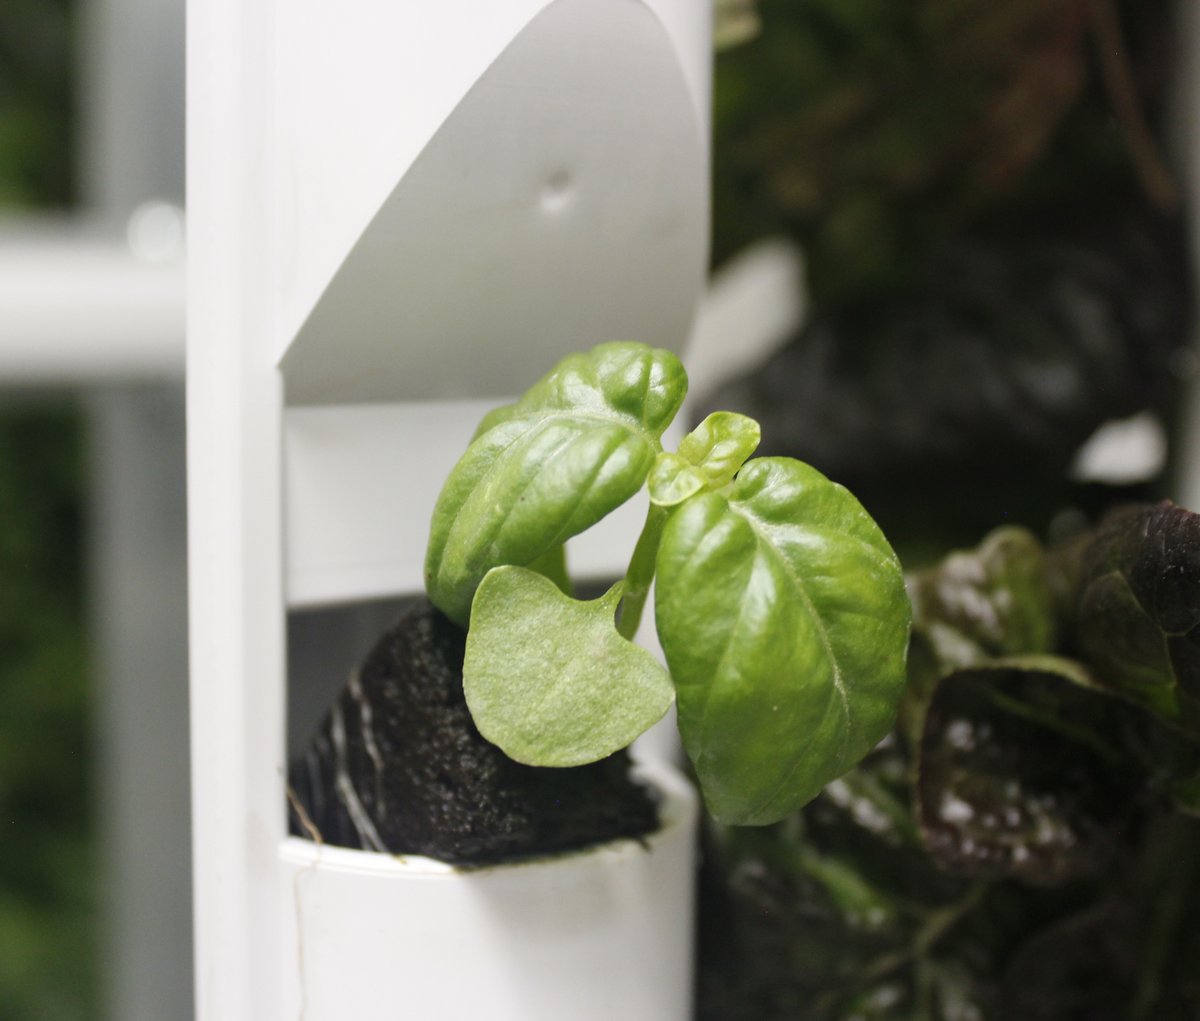 What's the best use of basil?

#basil #cooking #chef #culinary #growyourownfood #herbs #inthekitchen #food #foodie #verticalfarming #hydroponics #verticalfarm